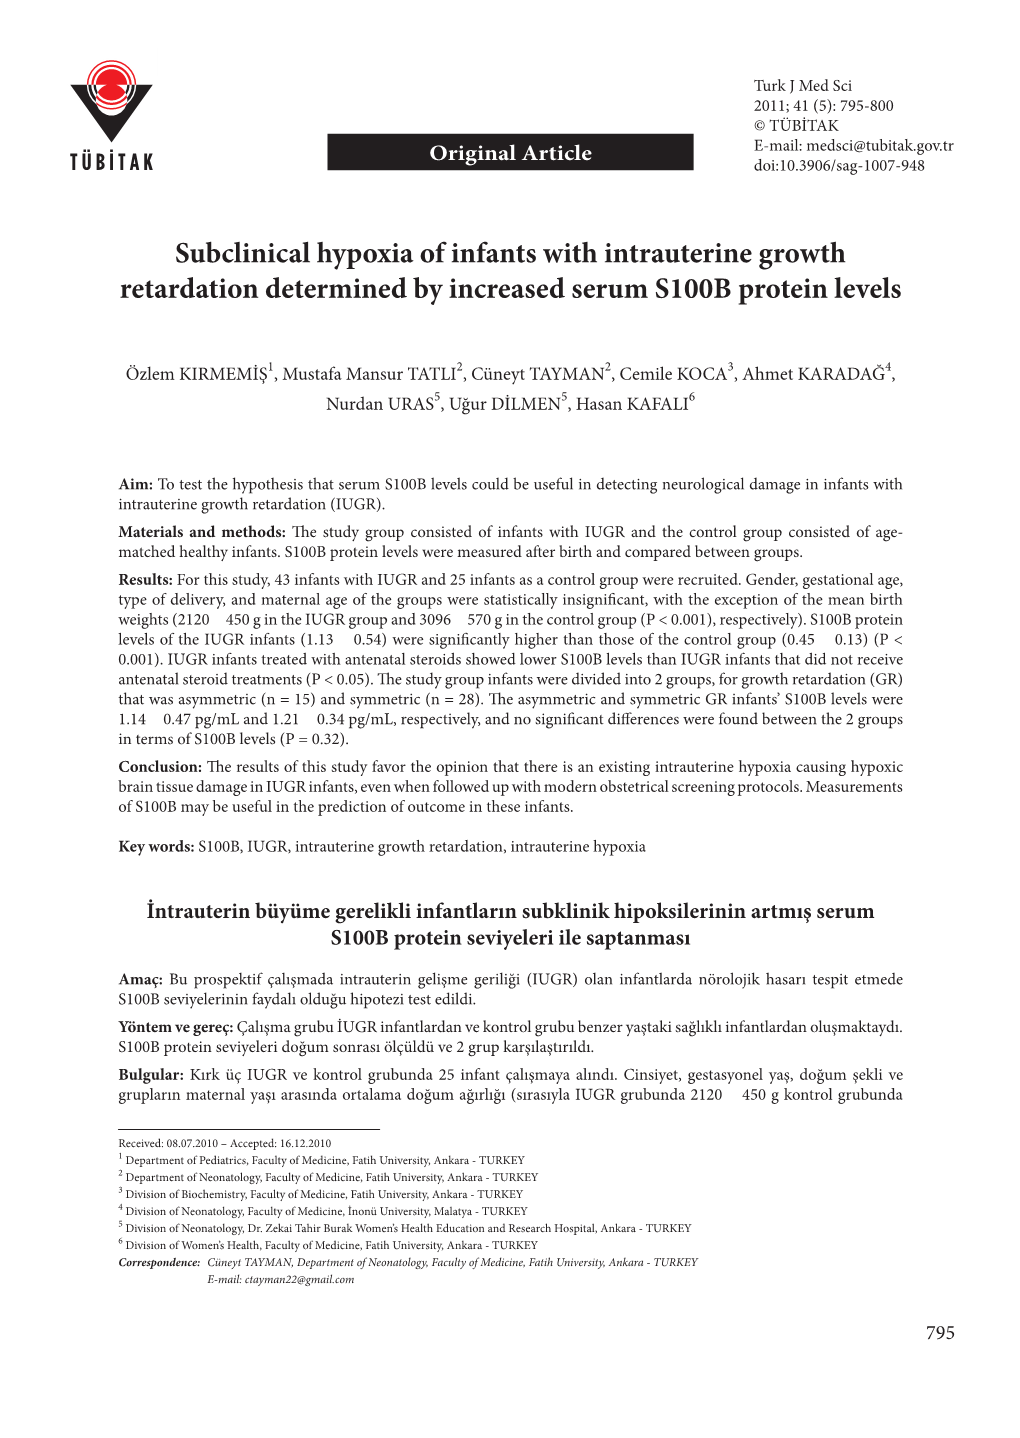 Subclinical Hypoxia of Infants with Intrauterine Growth Retardation Determined by Increased Serum S100B Protein Levels